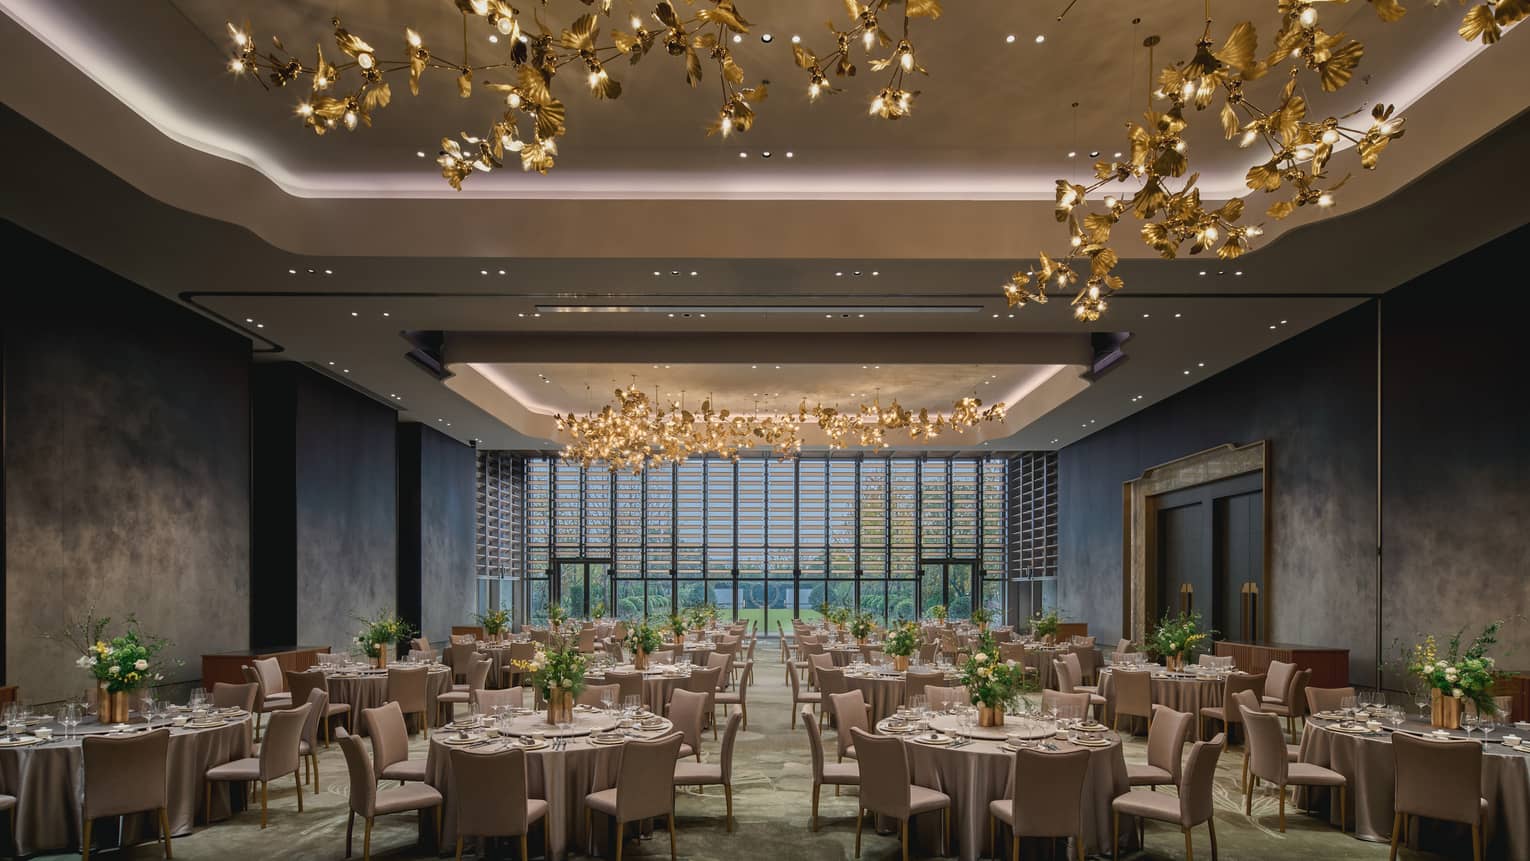 Elegant ballroom with gold leaf lighting installation and banquet seating